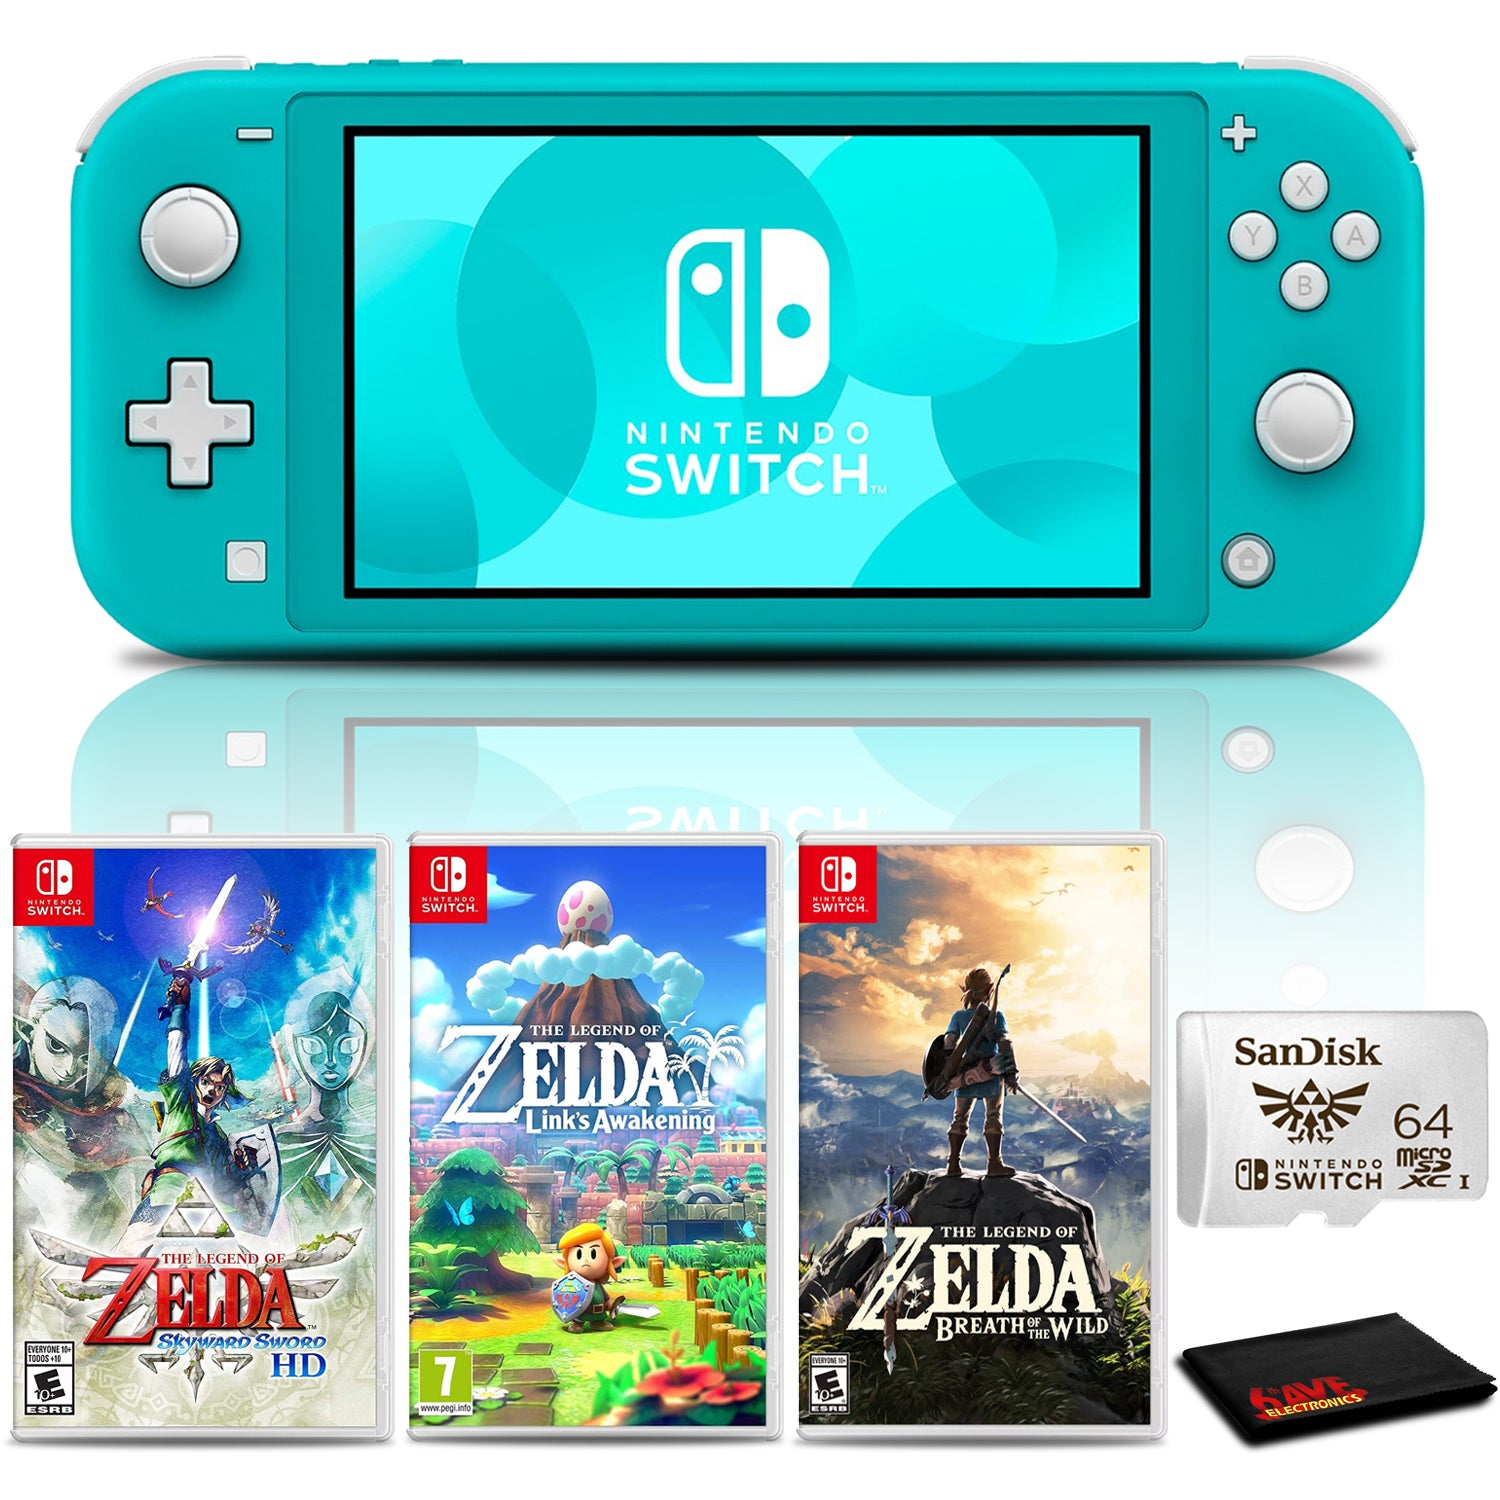 Nintendo Switch Lite Console (Turquoise) with 64GB microSD and 3-Pk Zelda Games